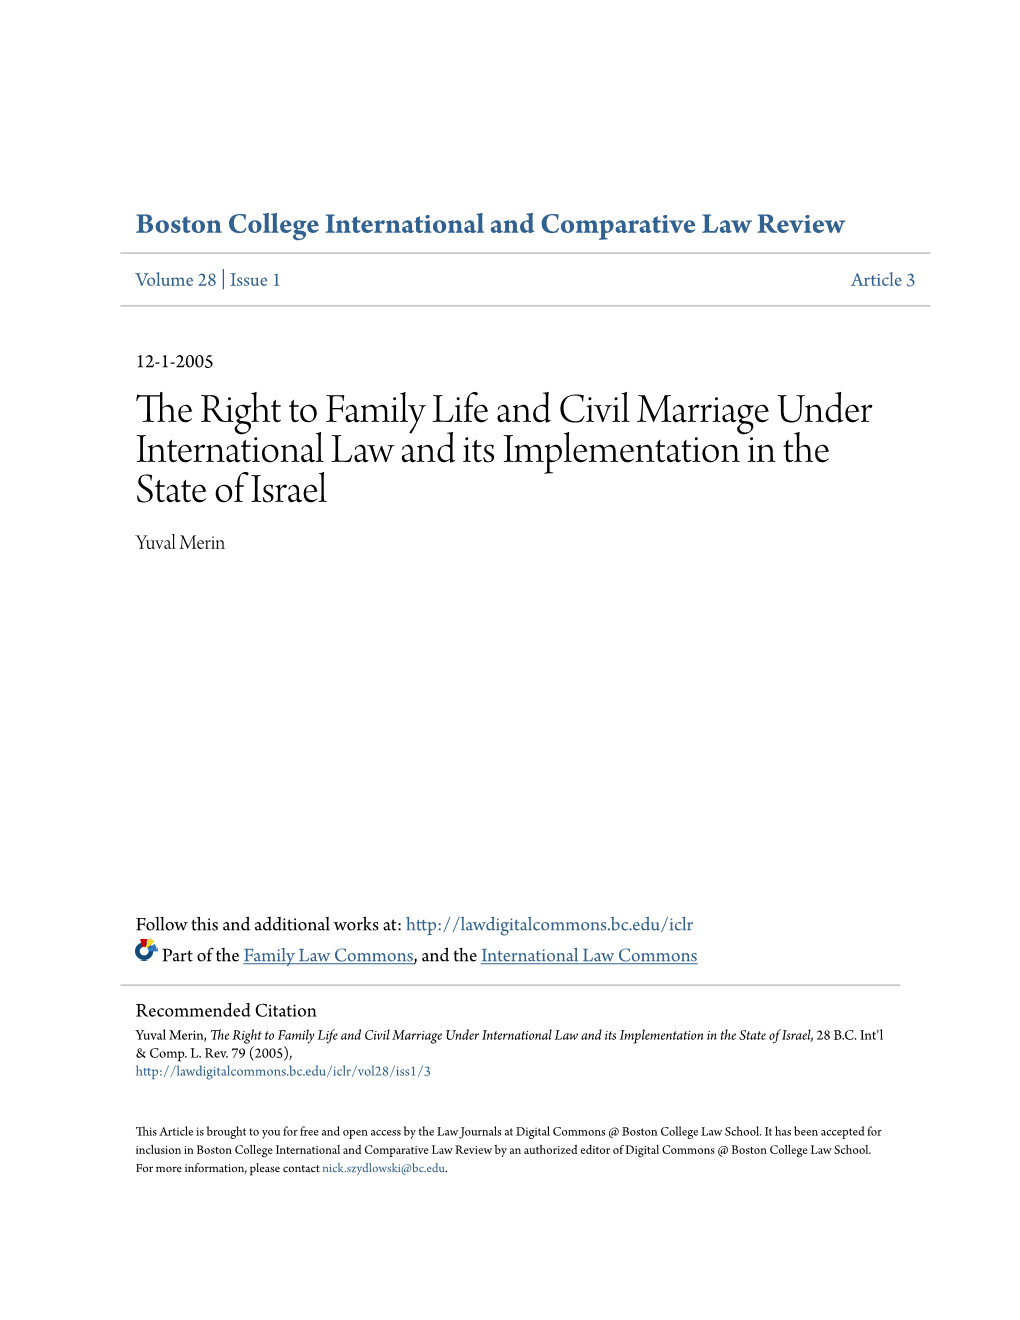 The Right to Family Life and Civil Marriage Under International Law and Its Implementation in the State of Israel Yuval Merin